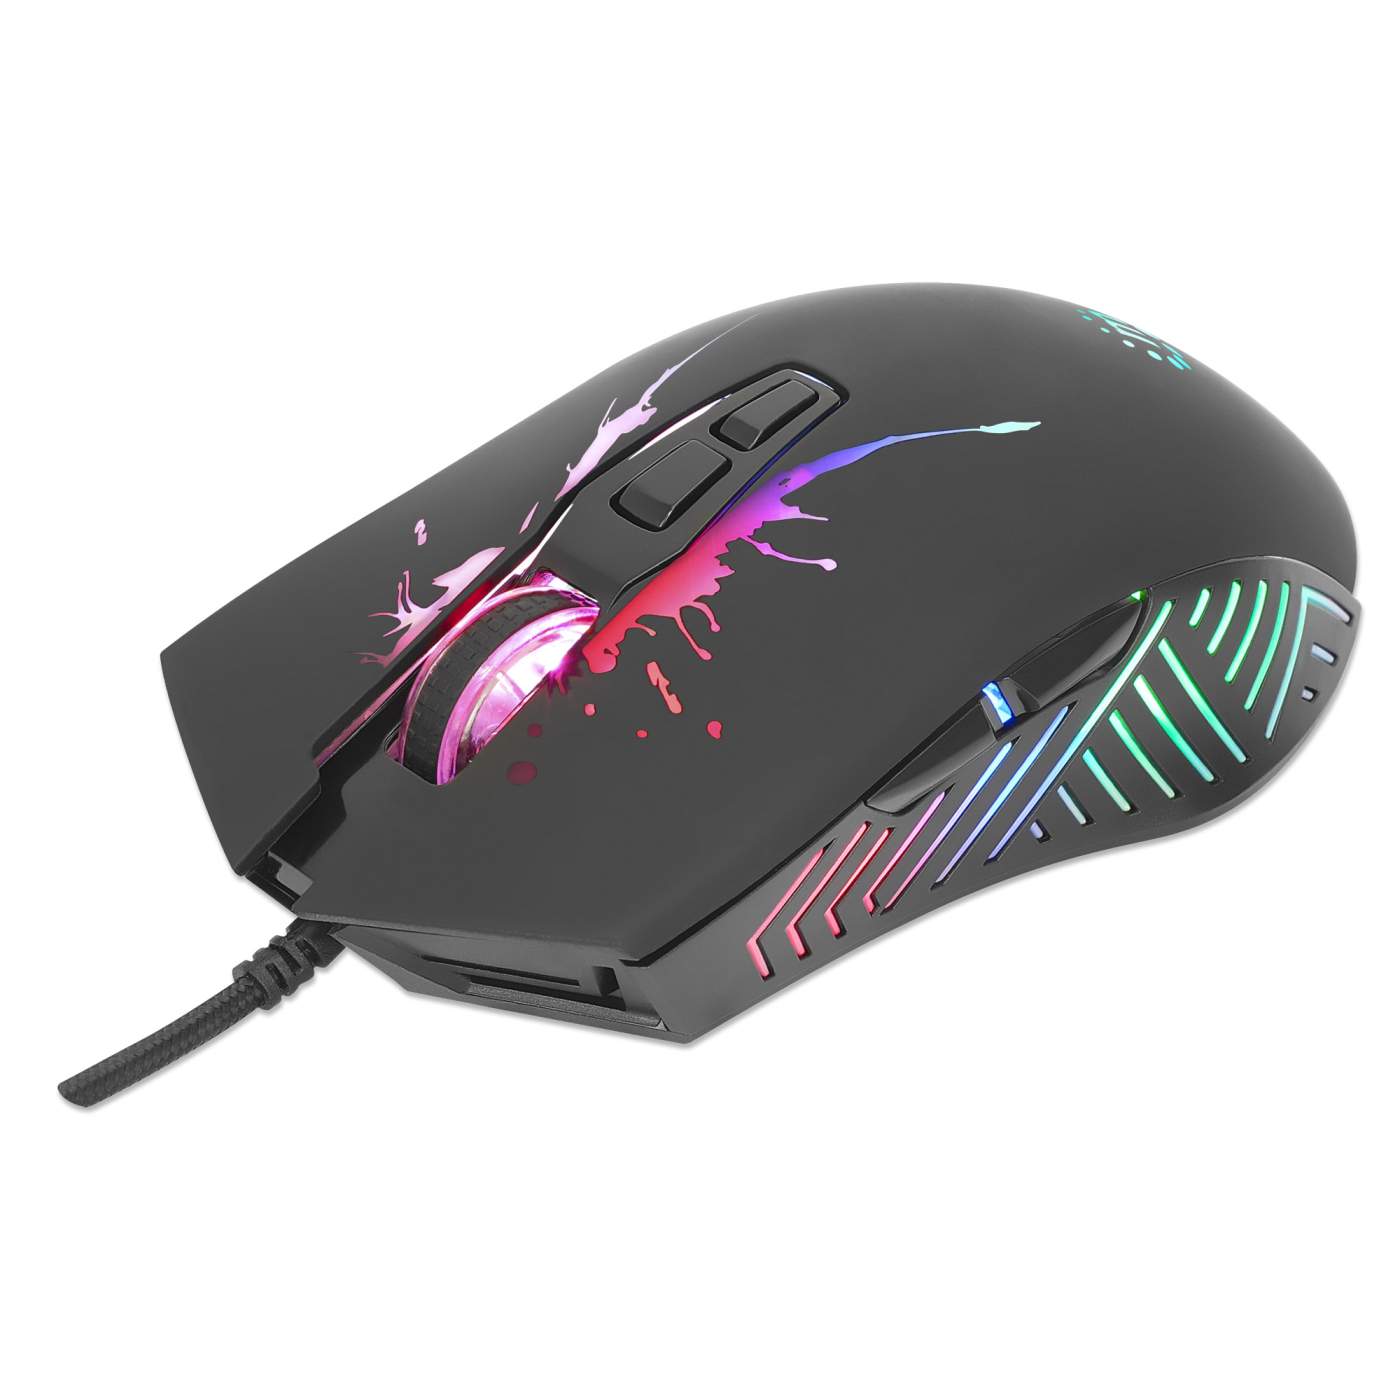 XXL RGB LED Gaming Mousepad w/ Wireless Charger - 10 W (425513)